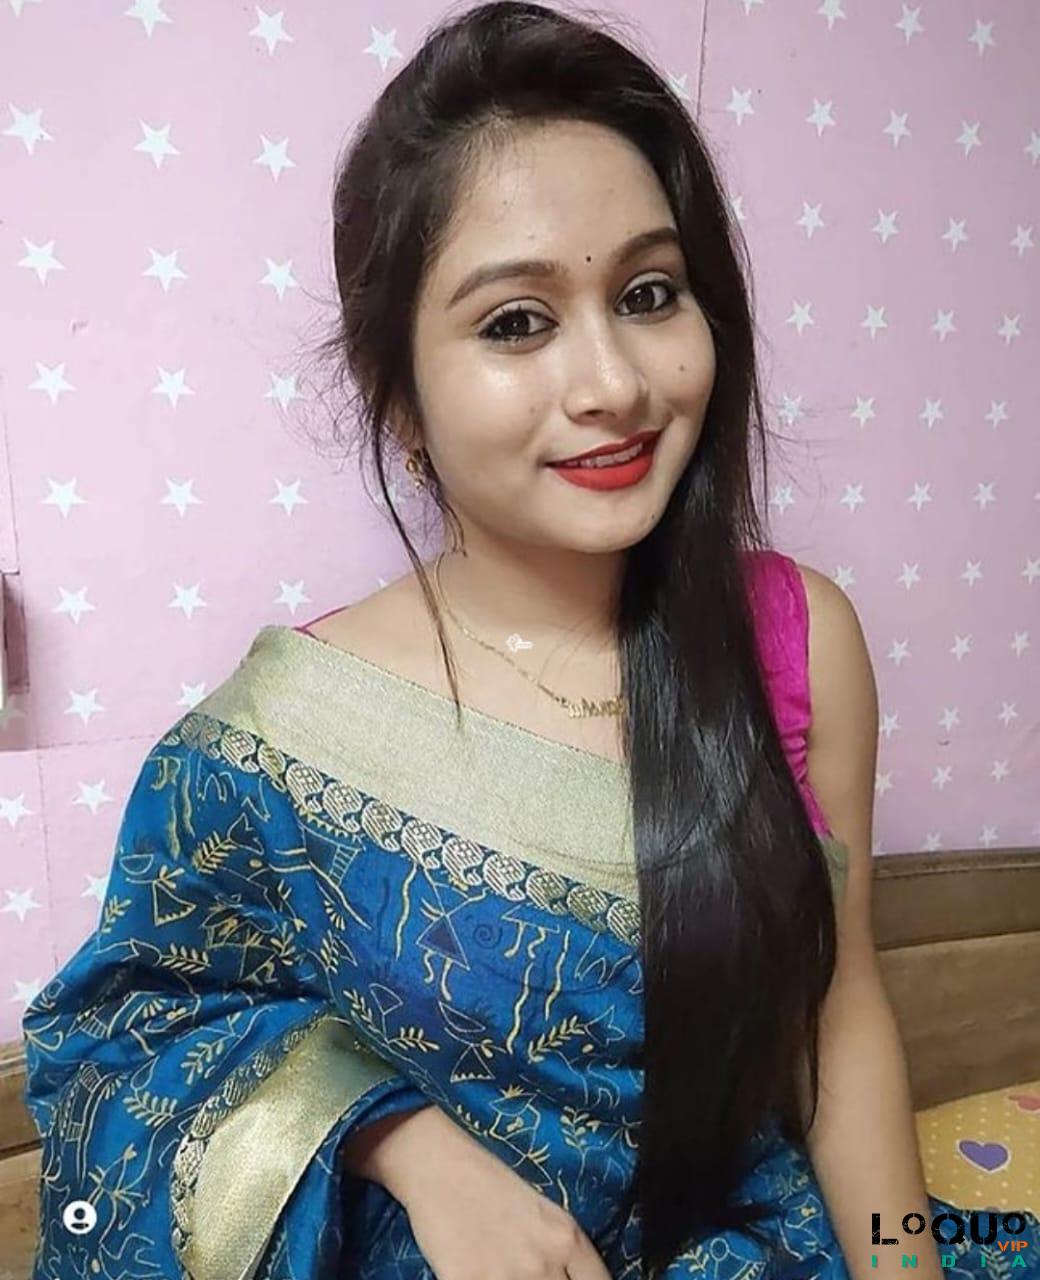 Call Girls Dadra and Nagar Haveli and Daman and Diu: ♥️♥️Rs 100 for 20 min ♥️♥️ Full Open Video Call Service In low p